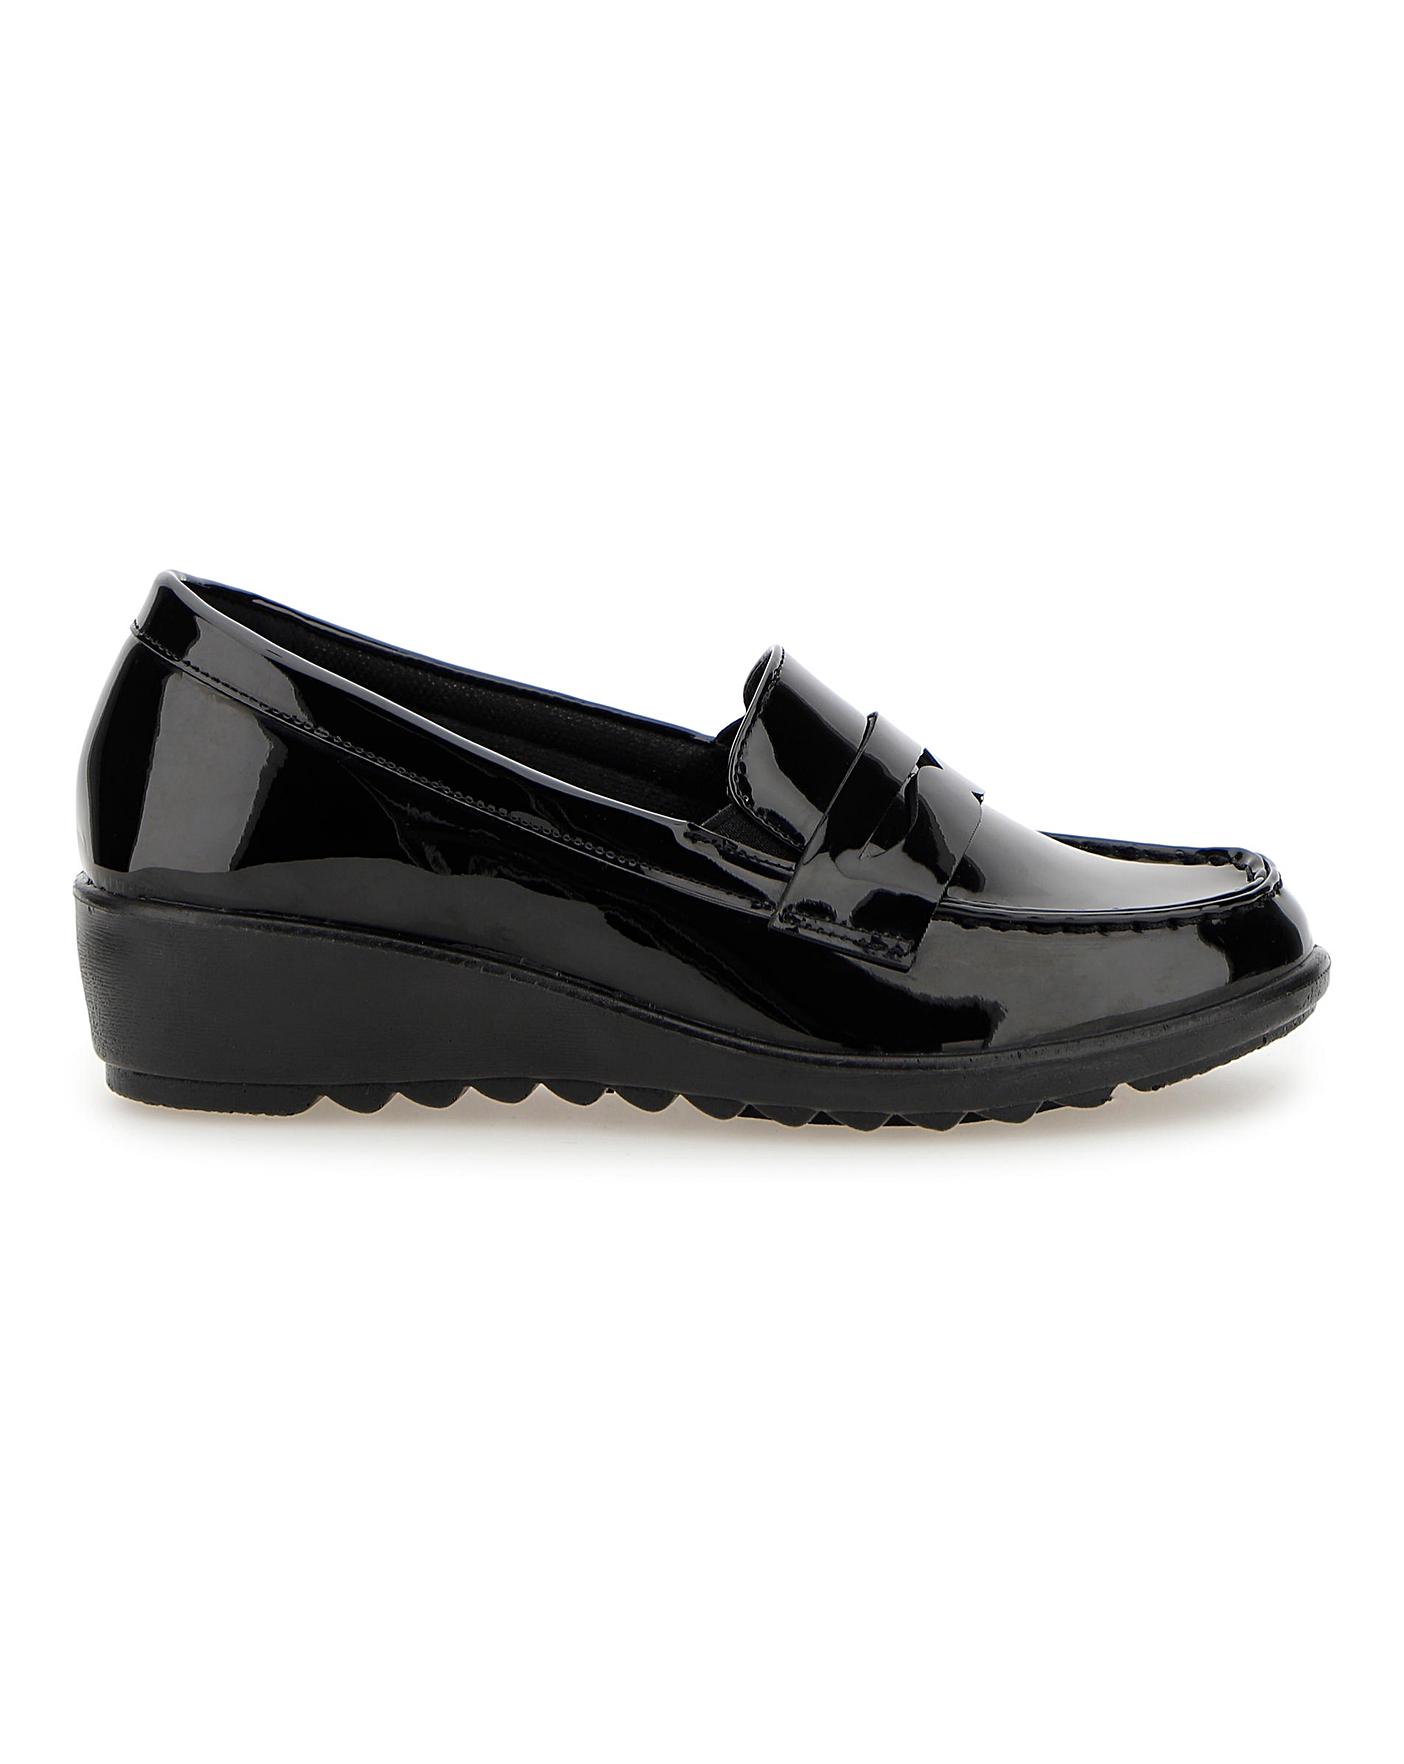 Cushion Walk Low Wedge Loafers E Fit | J D Williams